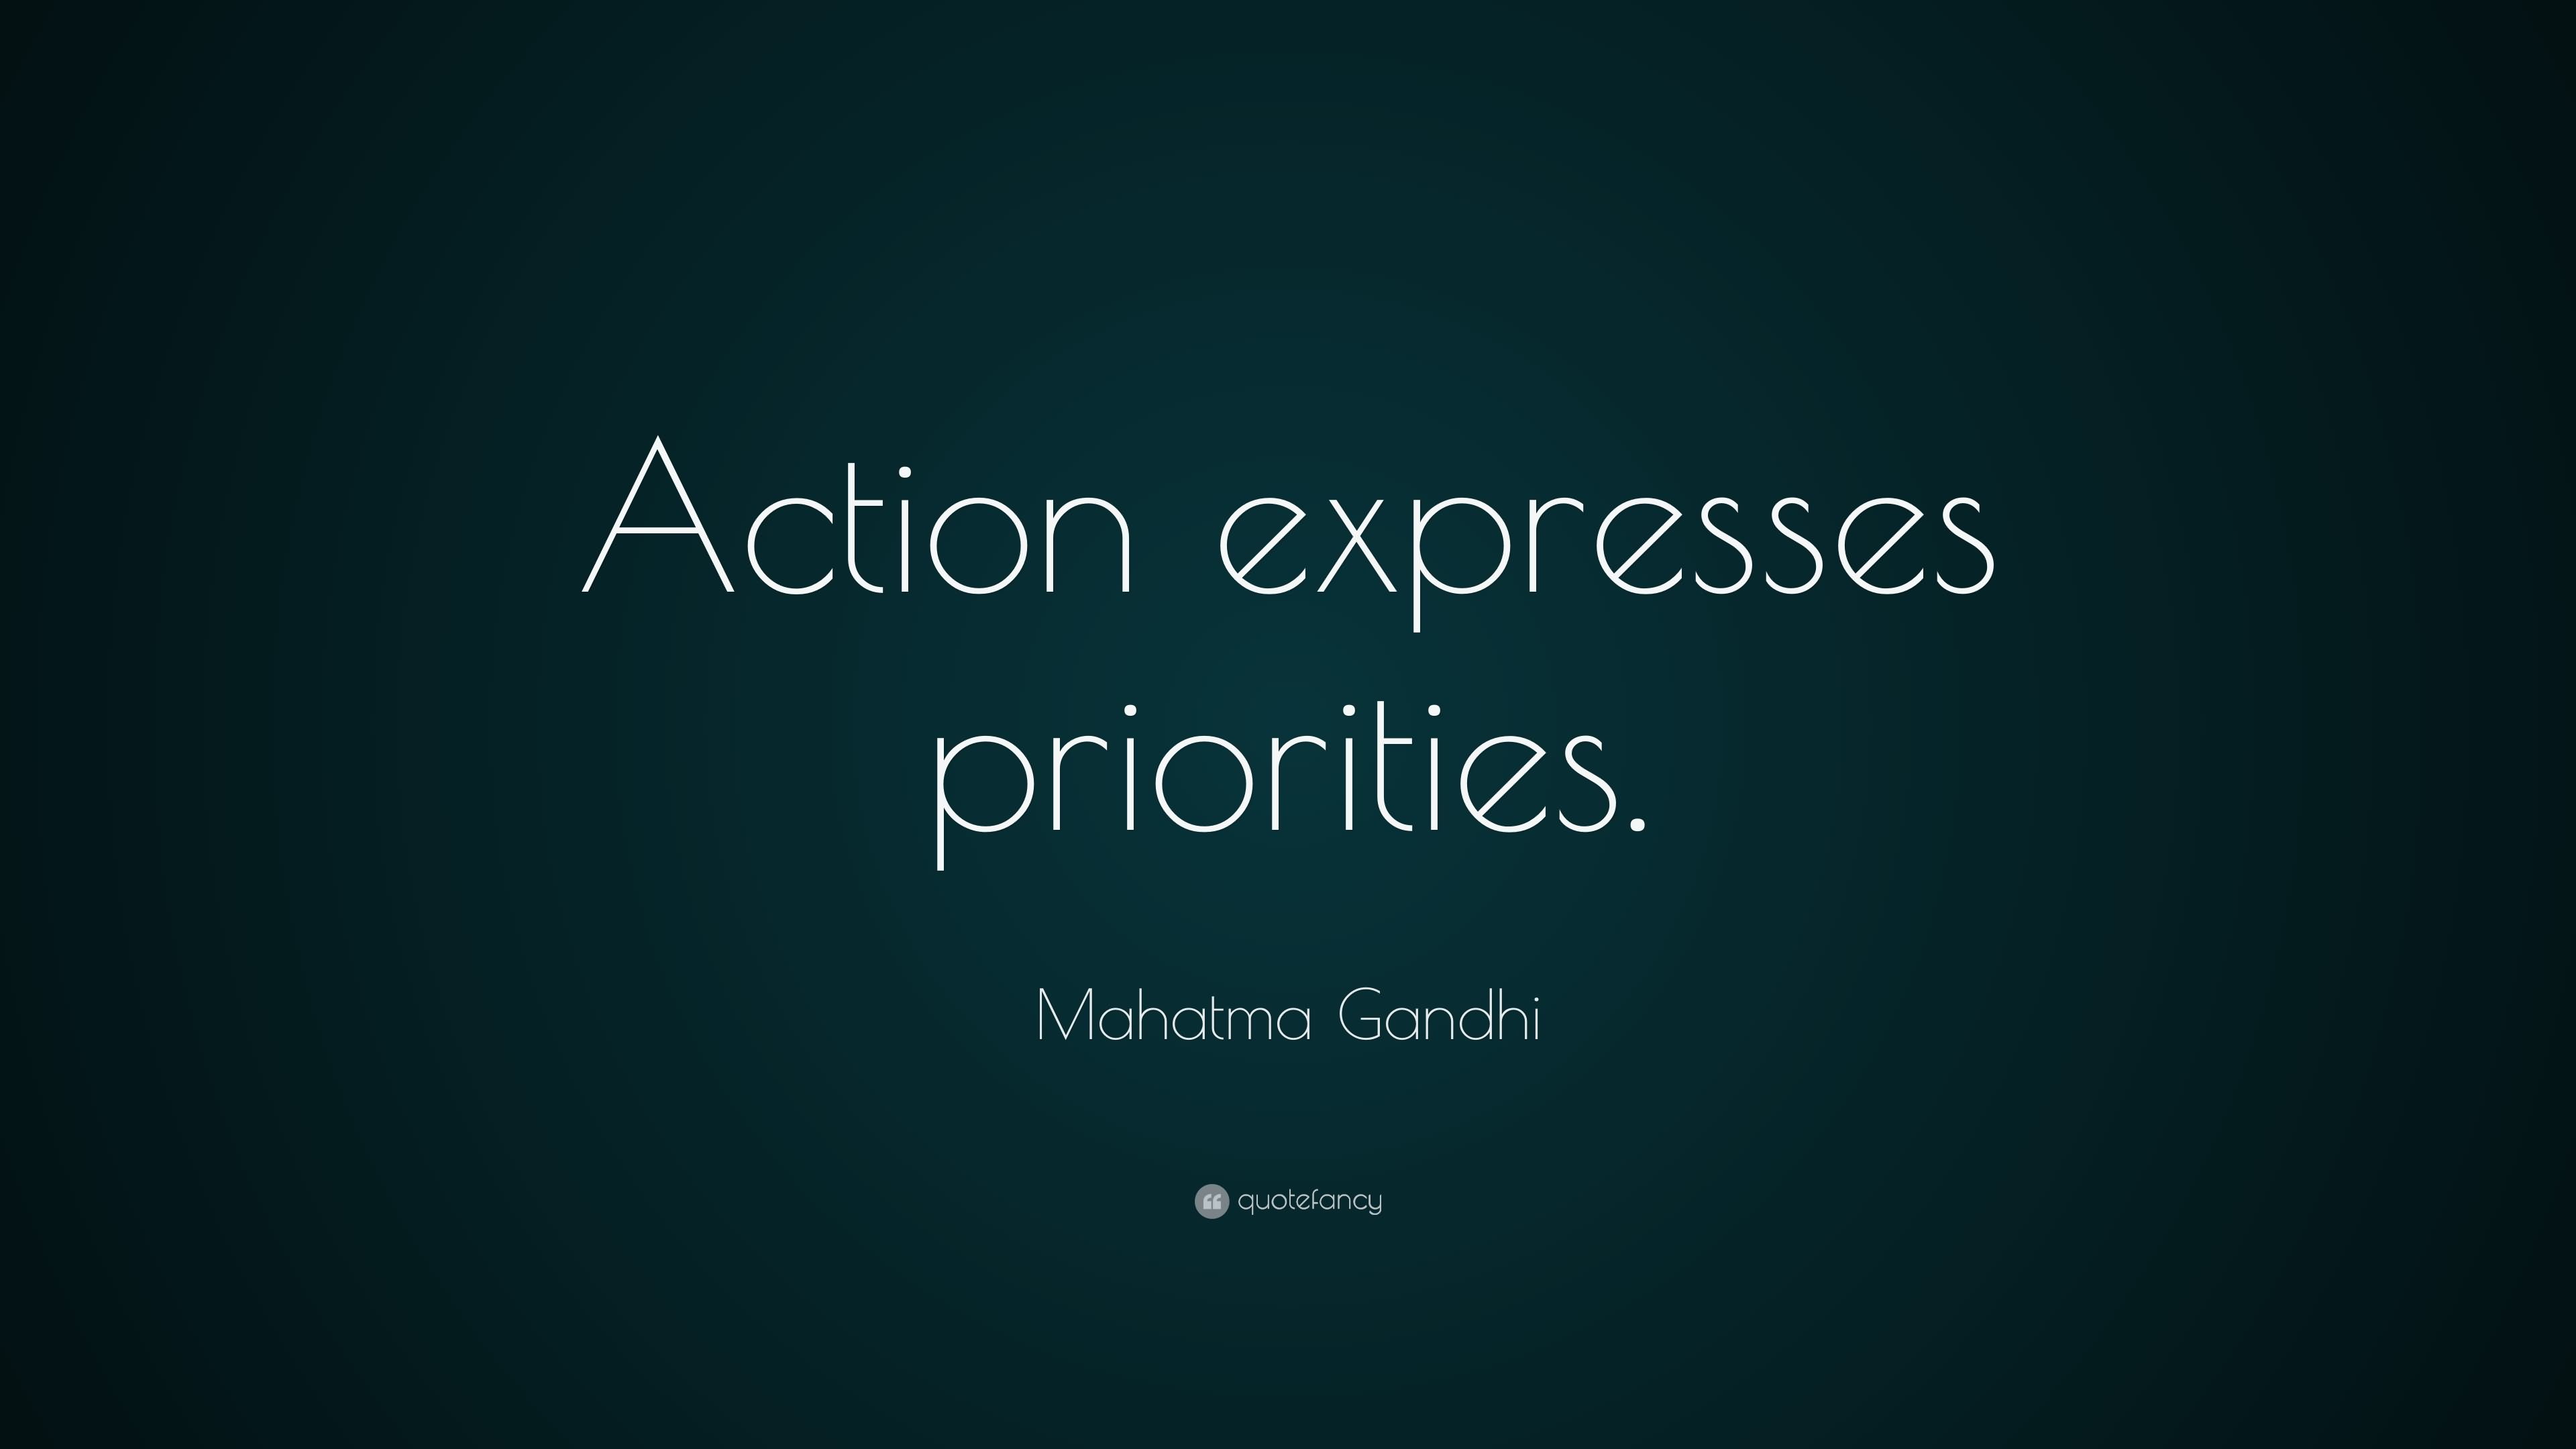 Action expresses priorities (33)